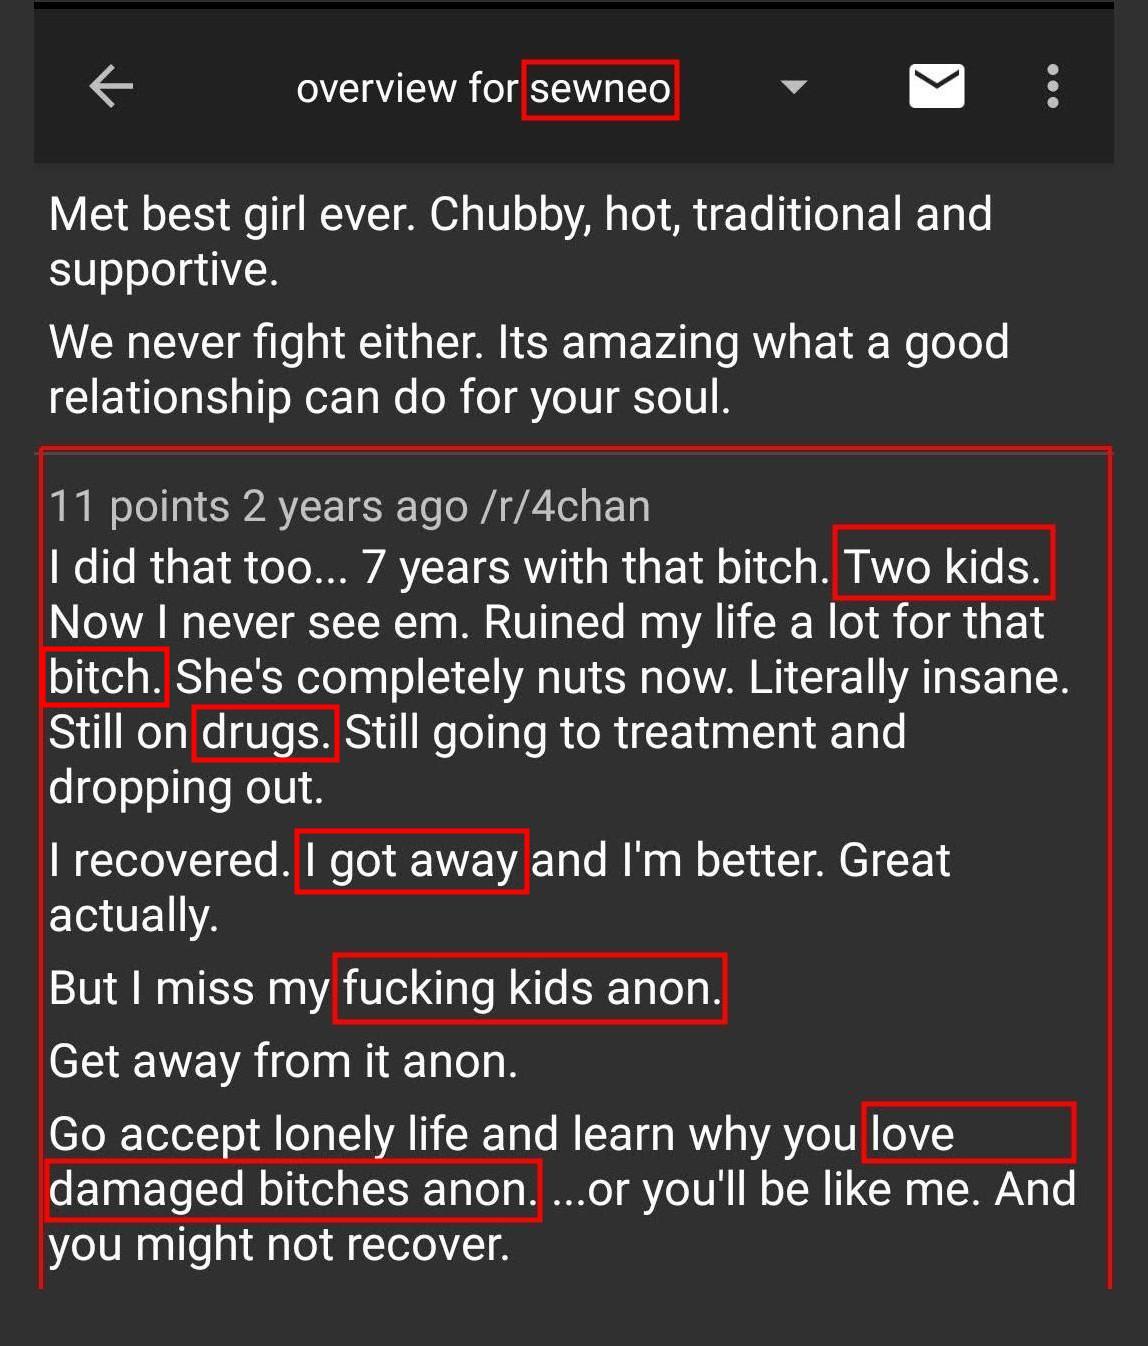 4chan sewneo  Met best girl ever. Chubby, hot, traditional and supportive.  We never fight either. Its amazing what a good relationship can do for your soul.  I did that too... 7 years with that bitch. Two kids. Now I never see em. Ruined my life a lot for that bitch. She's completely nuts now. Literally insane. Still on drugs. Still going to treatment and dropping out.  I recovered. I got away and I'm better. Great actually.  But I miss my fucking kids anon.  Get away from it anon.  Go accept lonely life and learn why you love damaged bitches anon. ..or you'll be like me. And you might not recover.